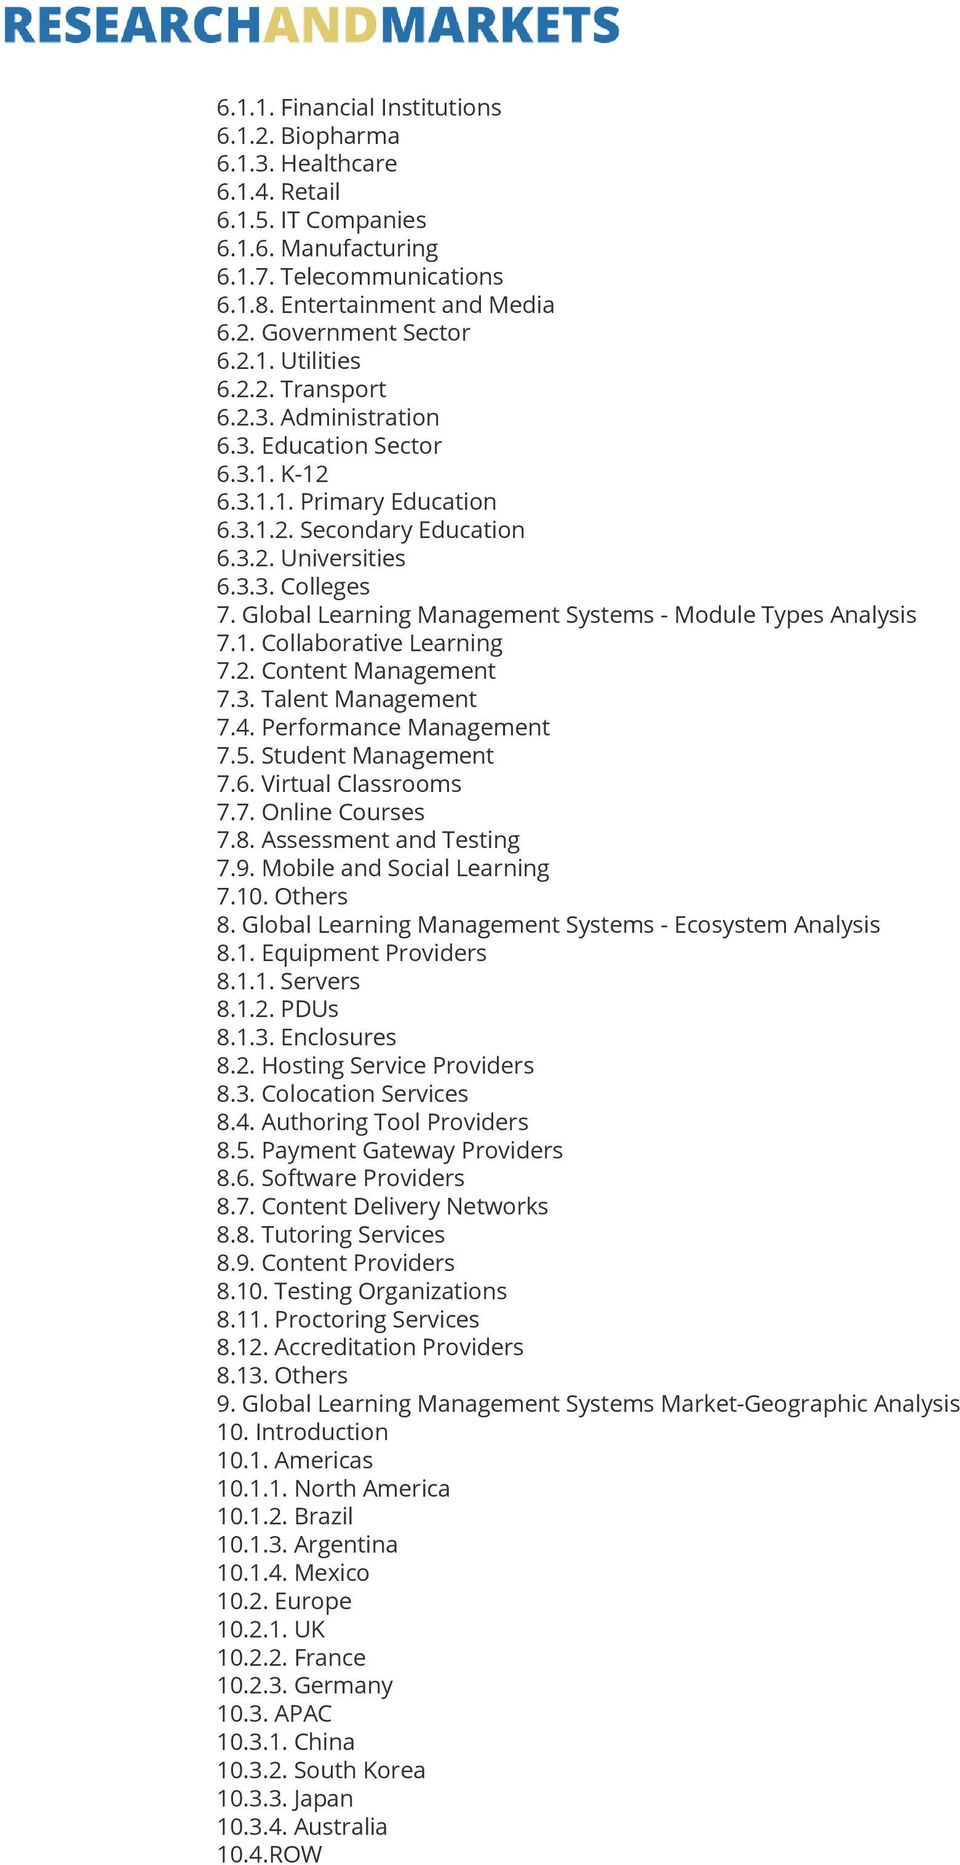 Global Learning Management Systems - Module Types Analysis 7.1. Collaborative Learning 7.2. Content Management 7.3. Talent Management 7.4. Performance Management 7.5. Student Management 7.6.